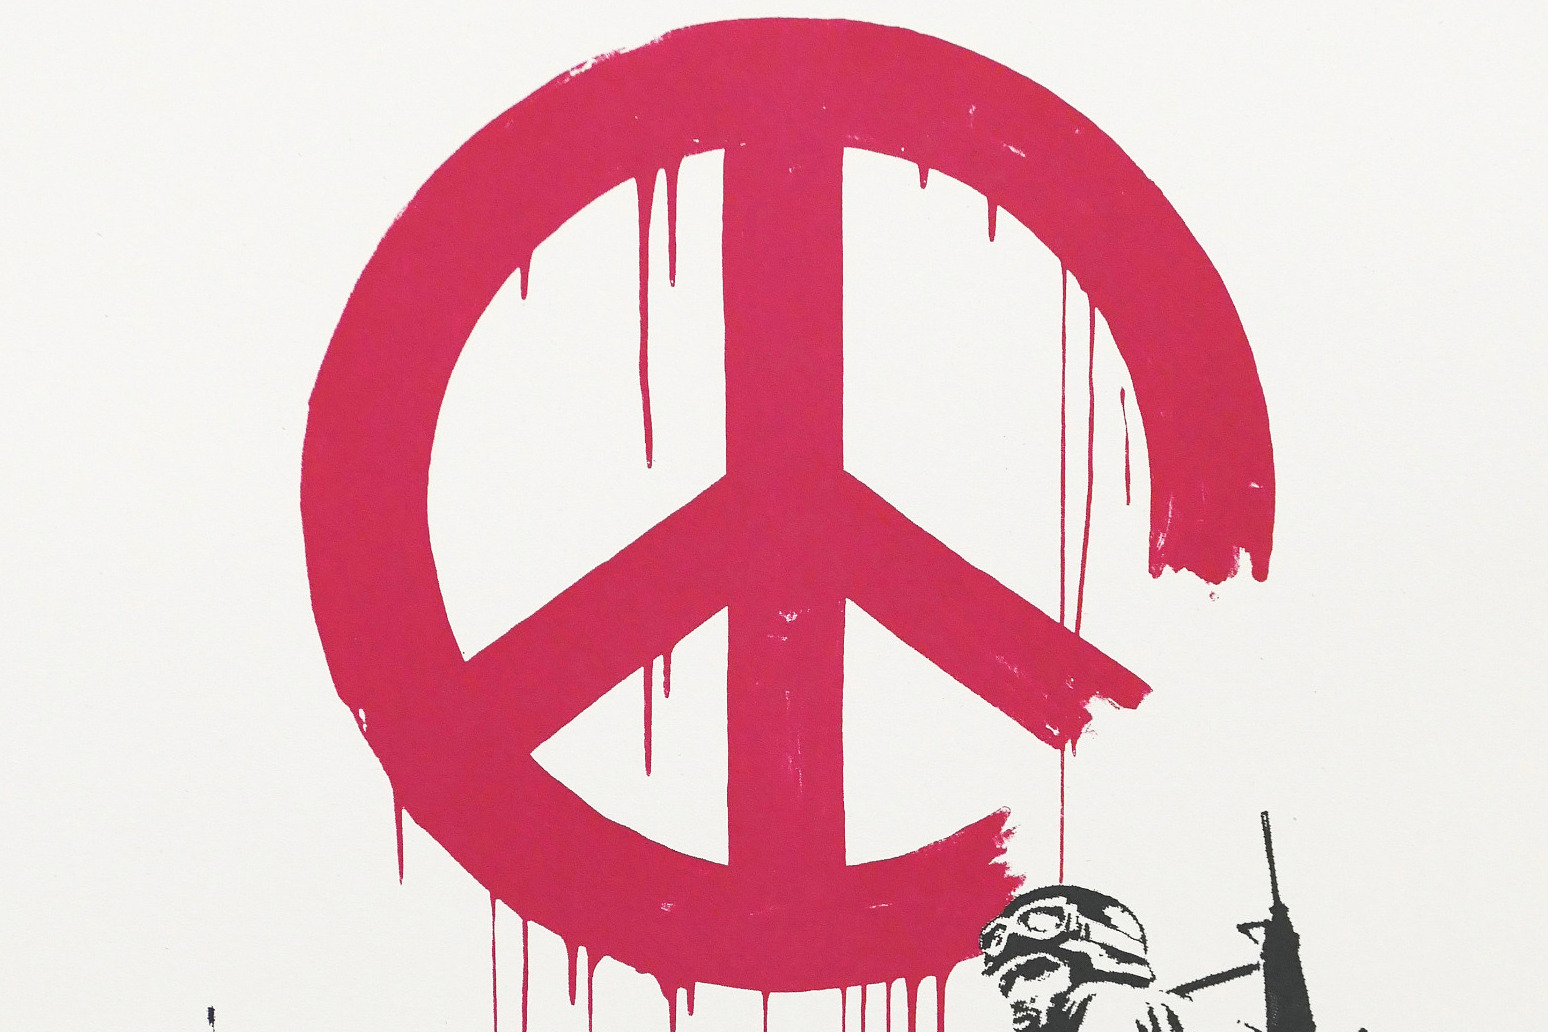 Auction of Banksy work to raise funds for Ukraine receives ‘flurry of bids’ 